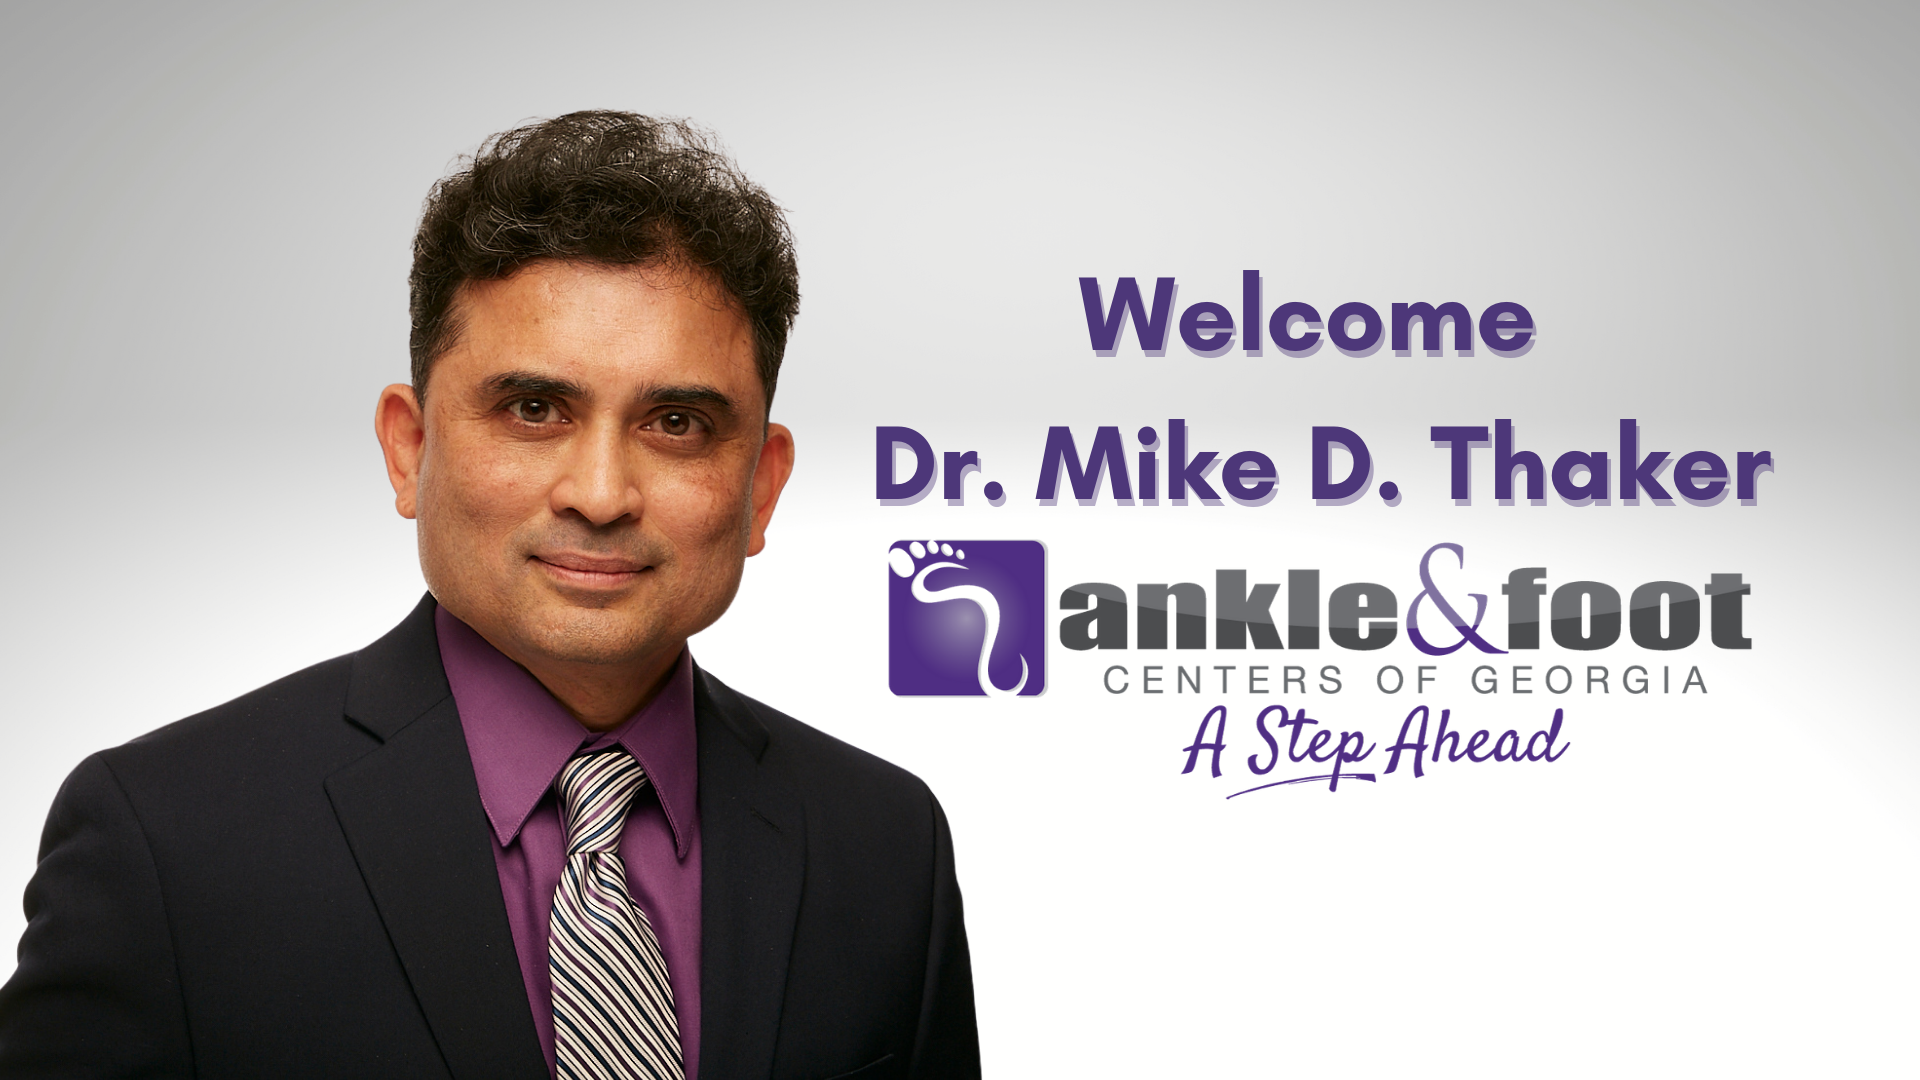 Ankle & Foot Centers of Georgia welcomes Dr. Mike D. Thaker